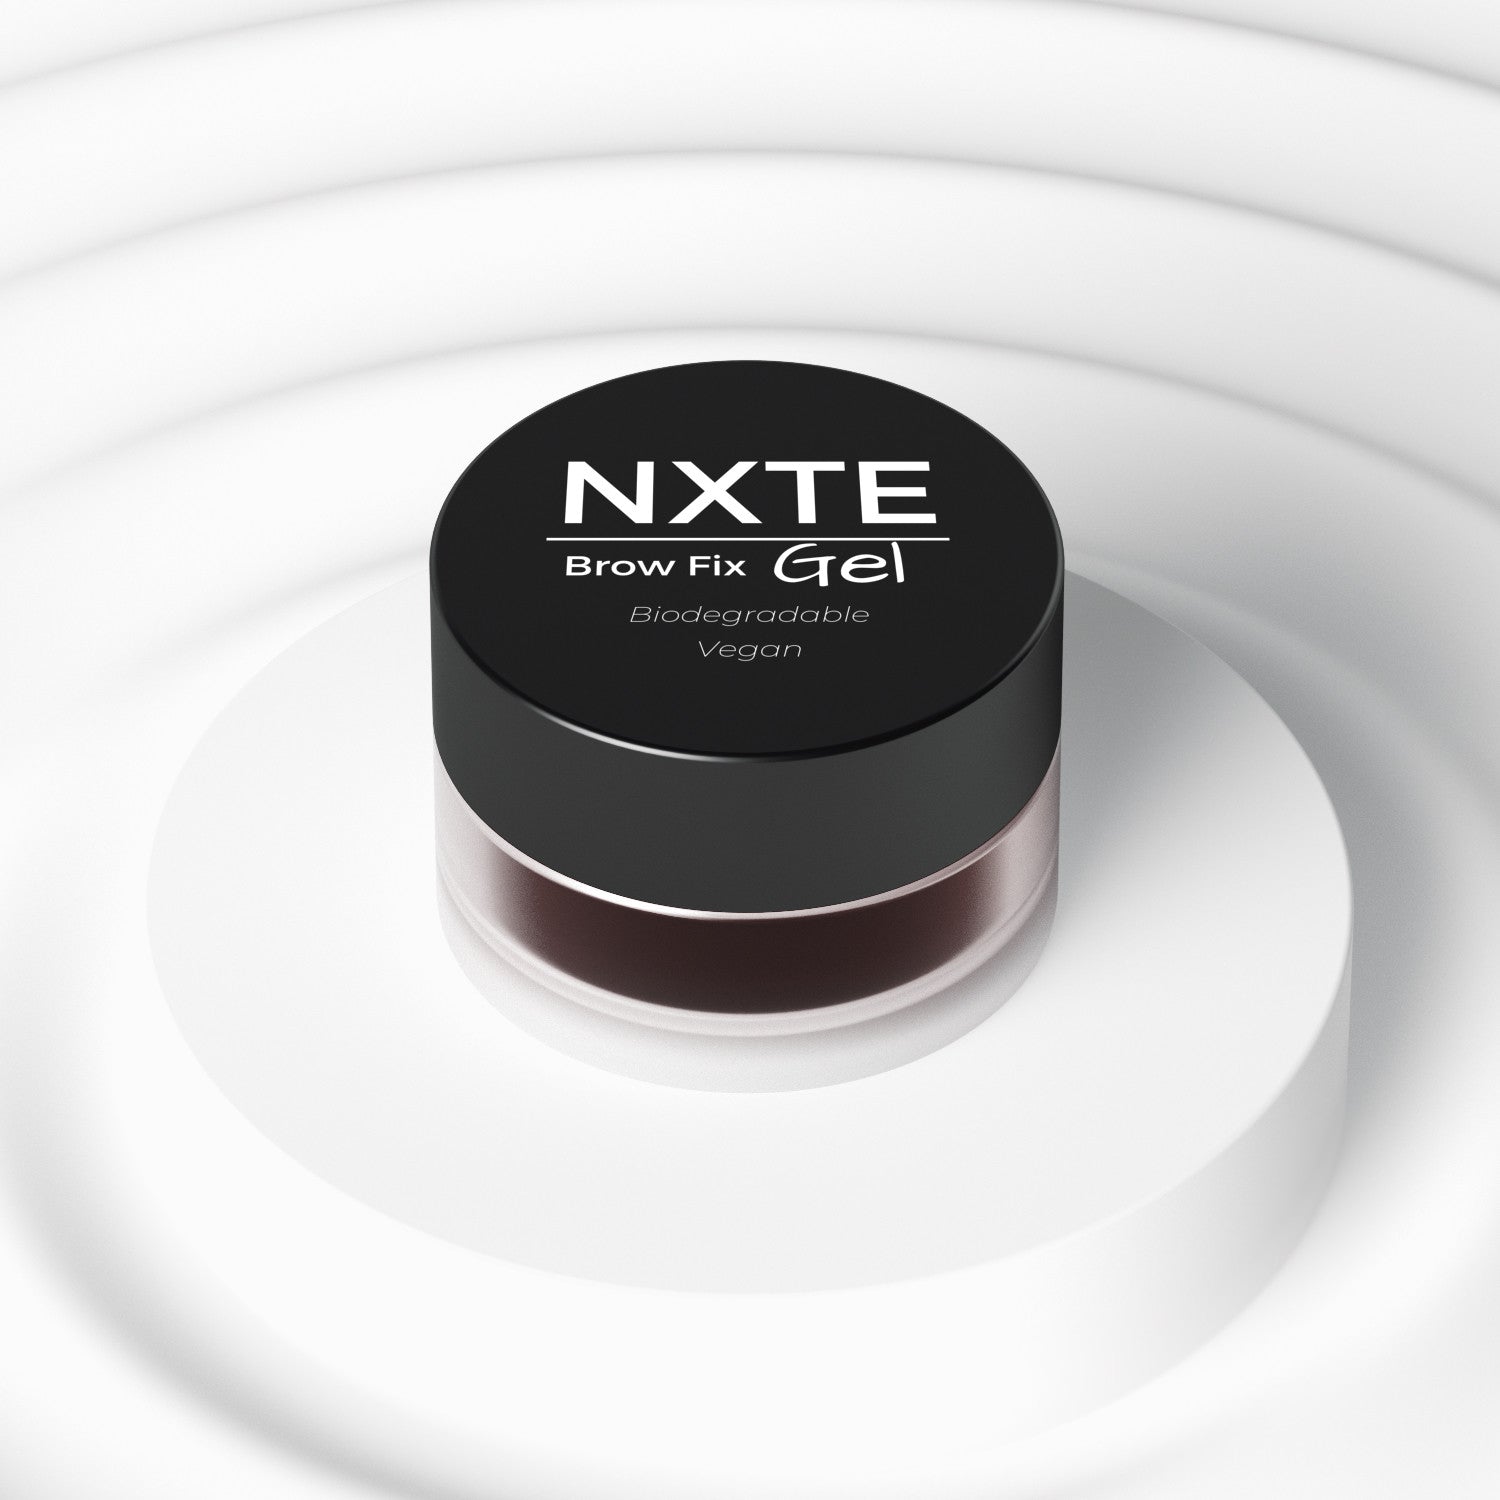 NXTE NXTEssence All In One Brow Fix Gel